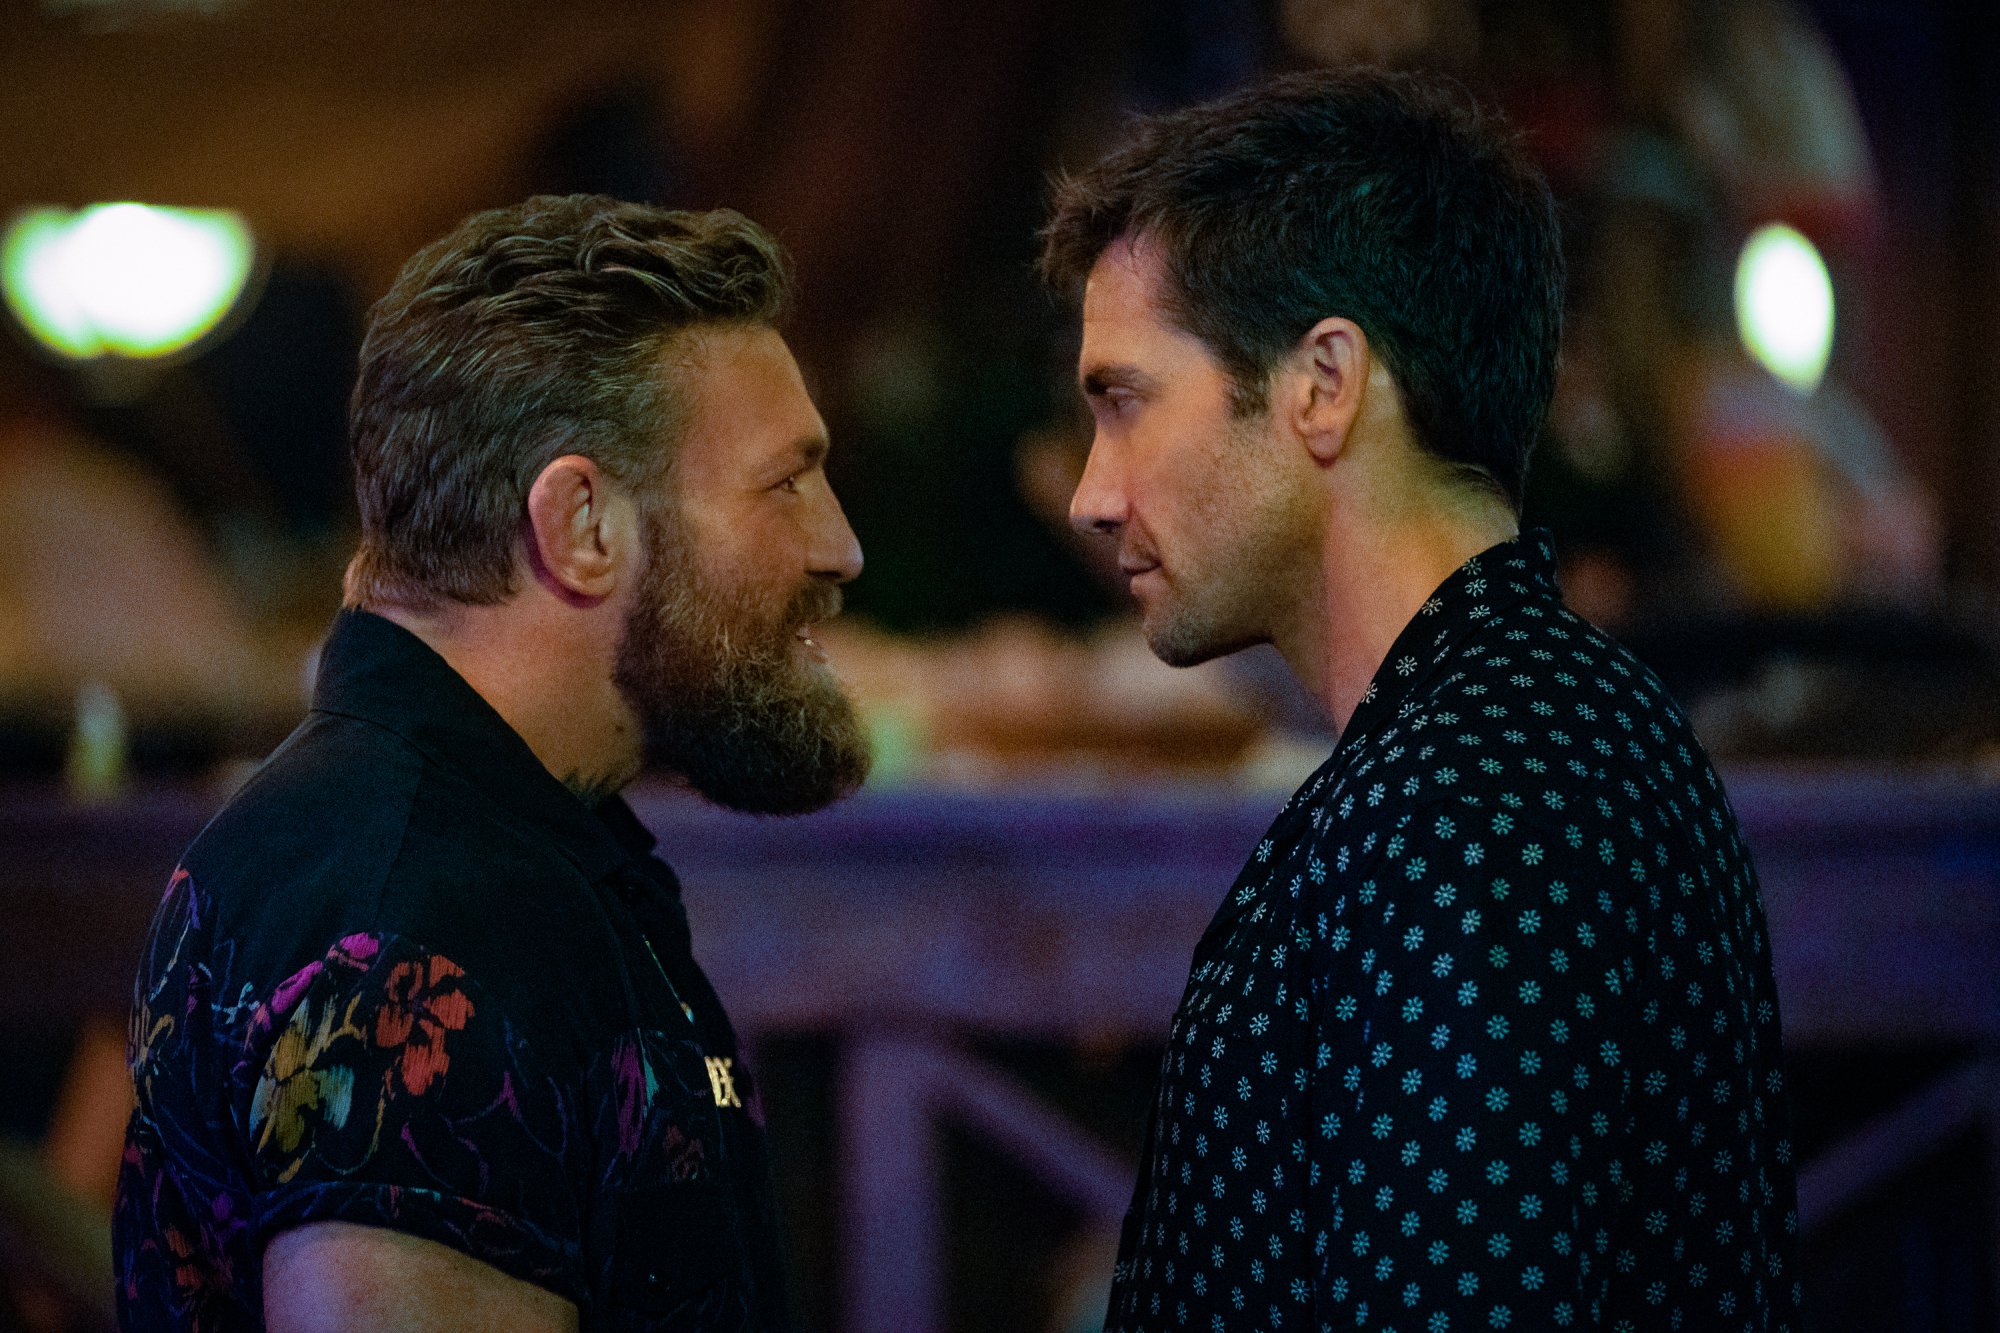 Jake Gyllenhaal and Conor McGregor in "Road House."